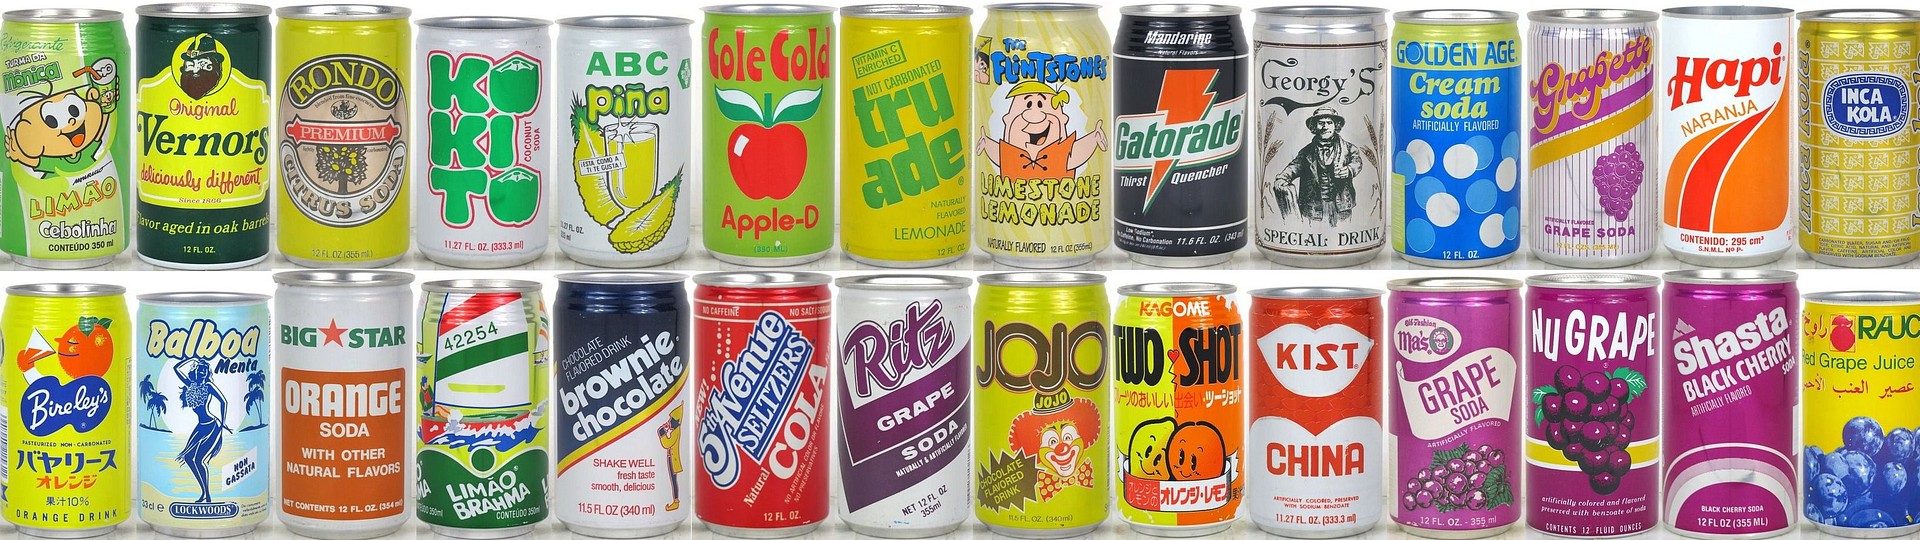 TavernTrove's Sample and Test Soda Can Auction by TavernTrove